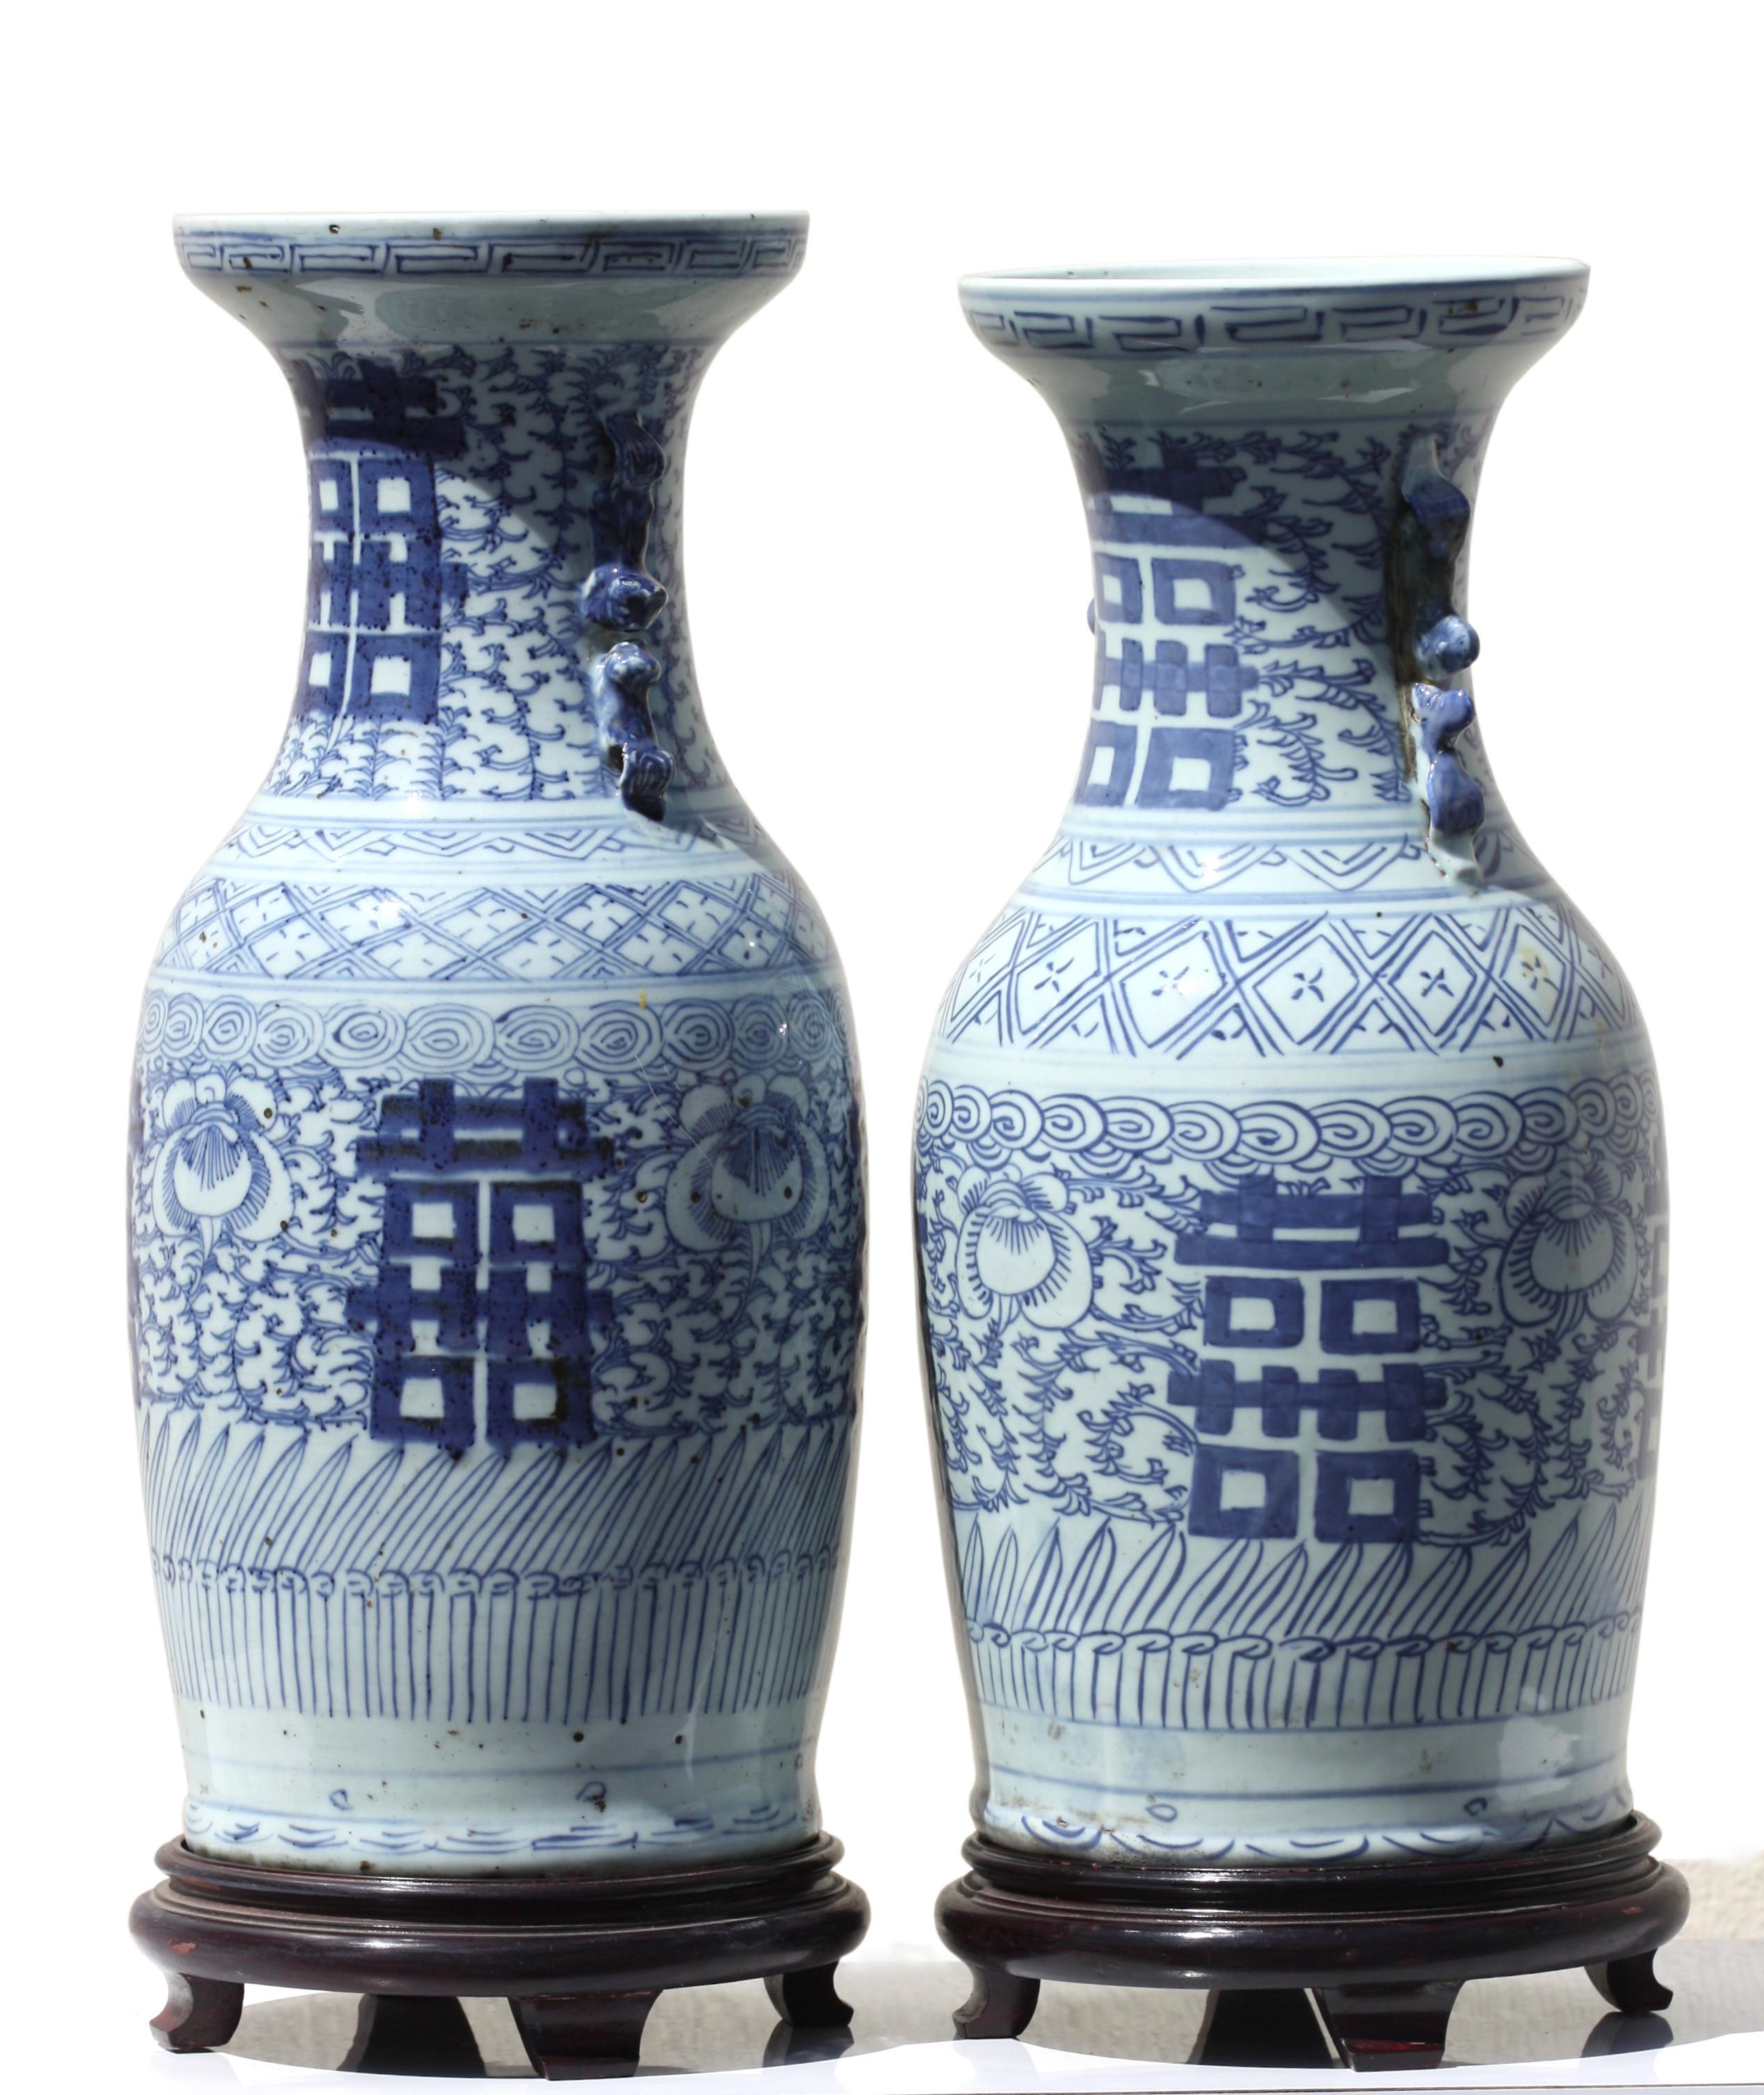 Two Chinese blue and white porcelain vases
Qing dynasty, 18th-19th century
decorated with flower sprays, Height 17.25 in. (69.21 cm.) and 16.5 in. (41.91 cm.) 
Diameter 8 in. (20.32 cm.).
 